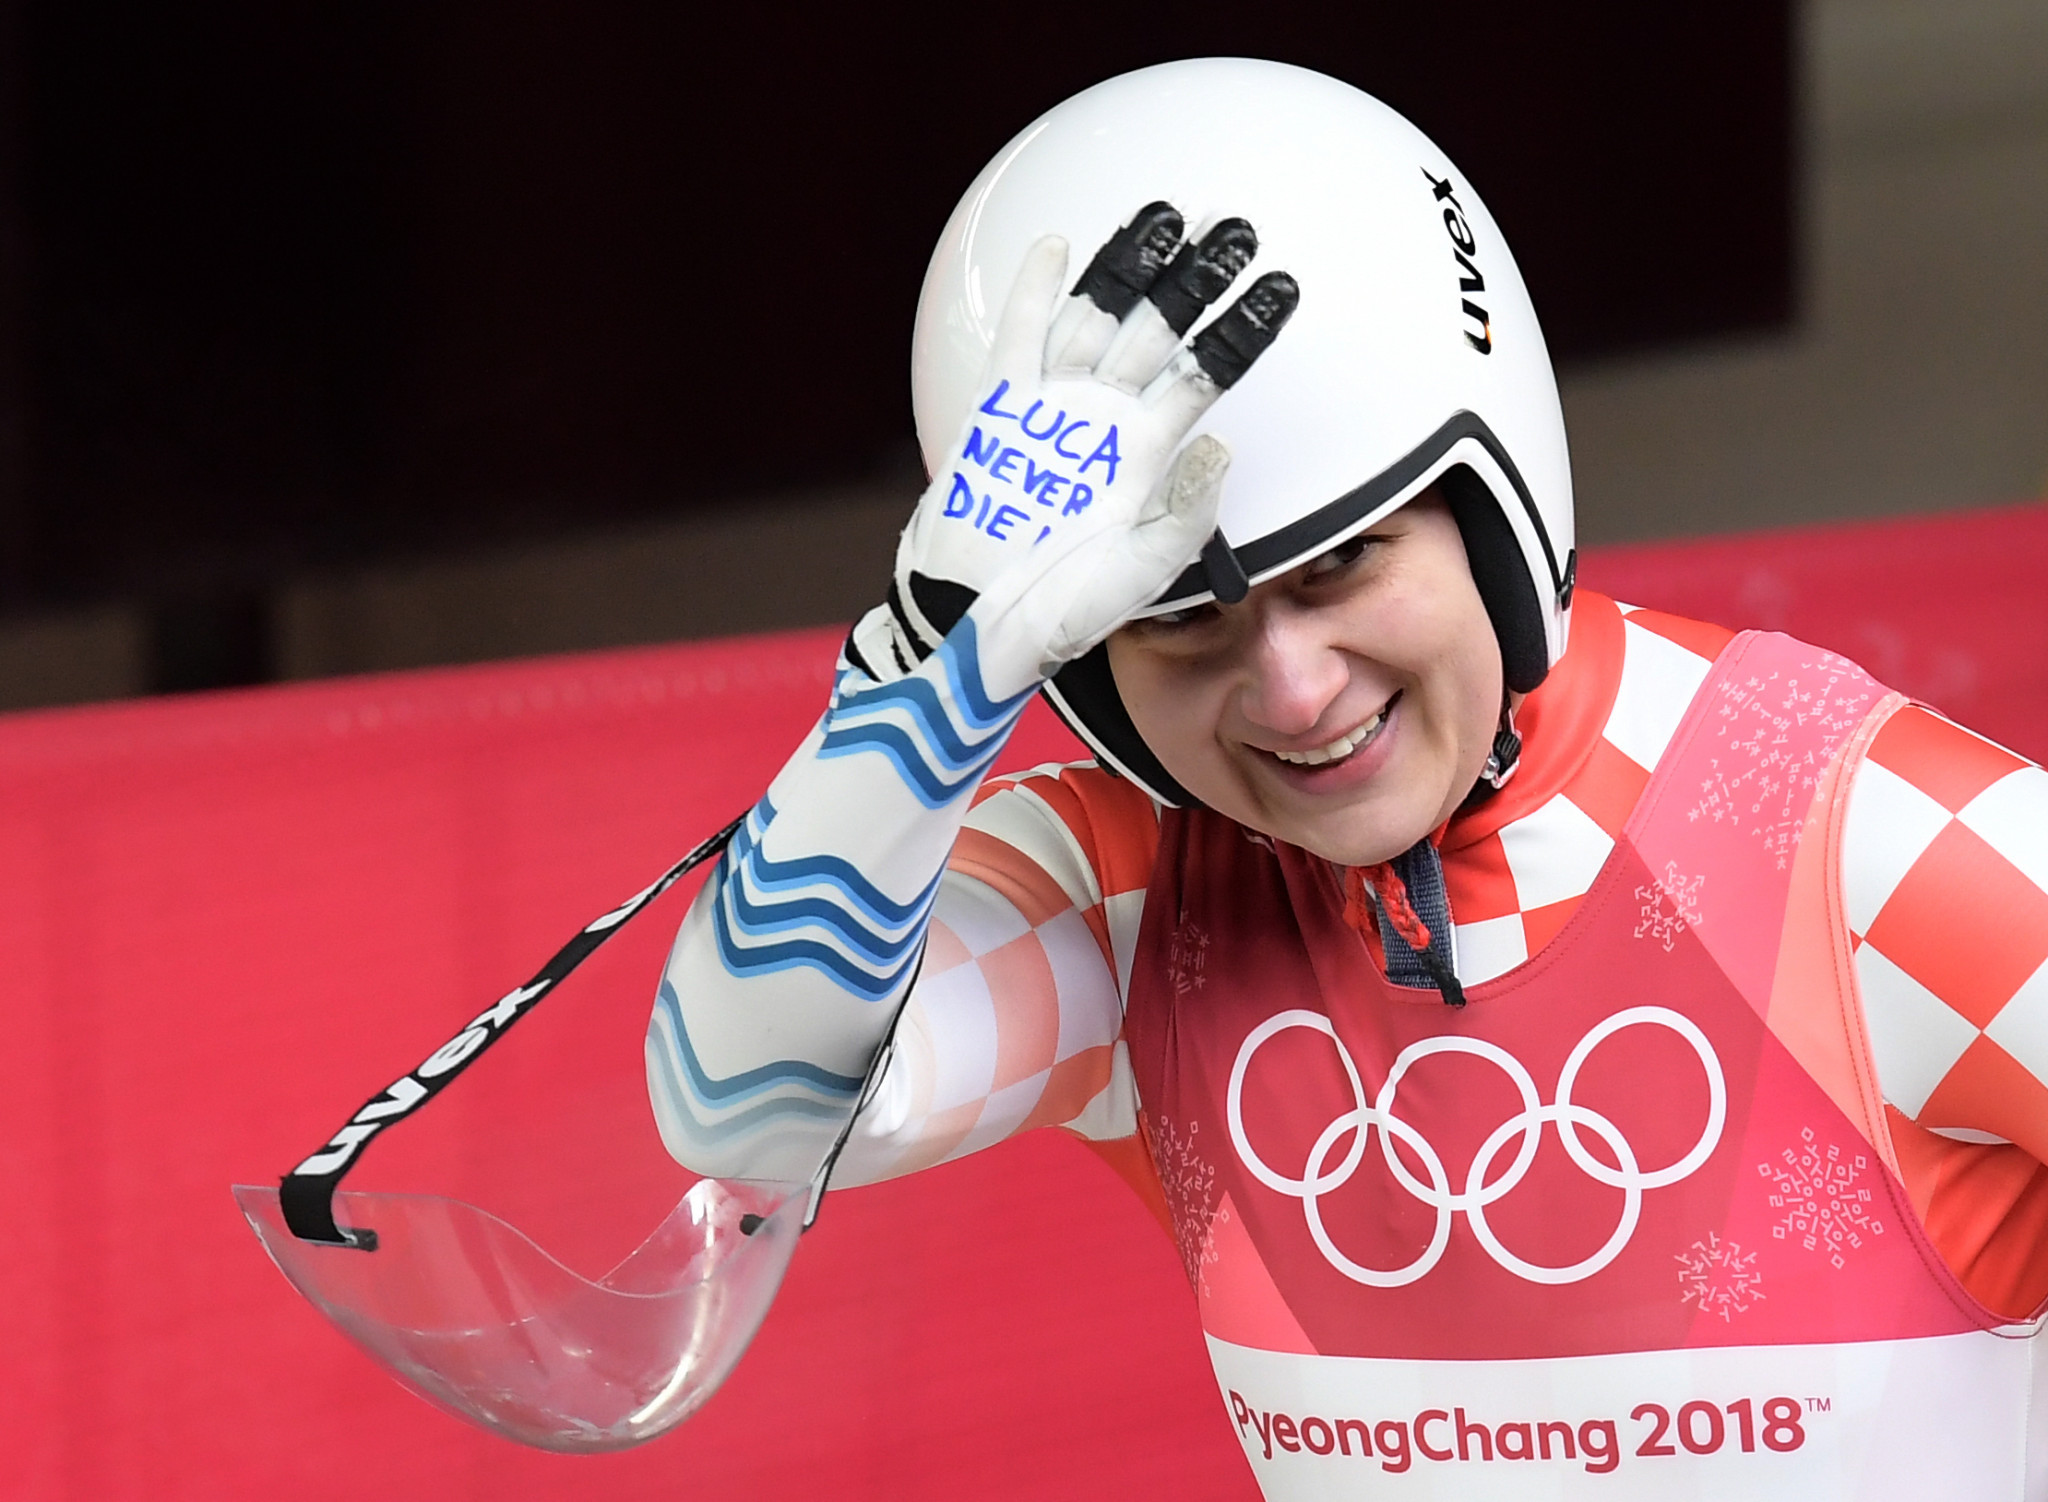 Daria Obratov, who in February became the first Croatian in history to compete in luge at the Winter Olympic Games, has been honoured by the European Fair Play Movement ©Getty Images